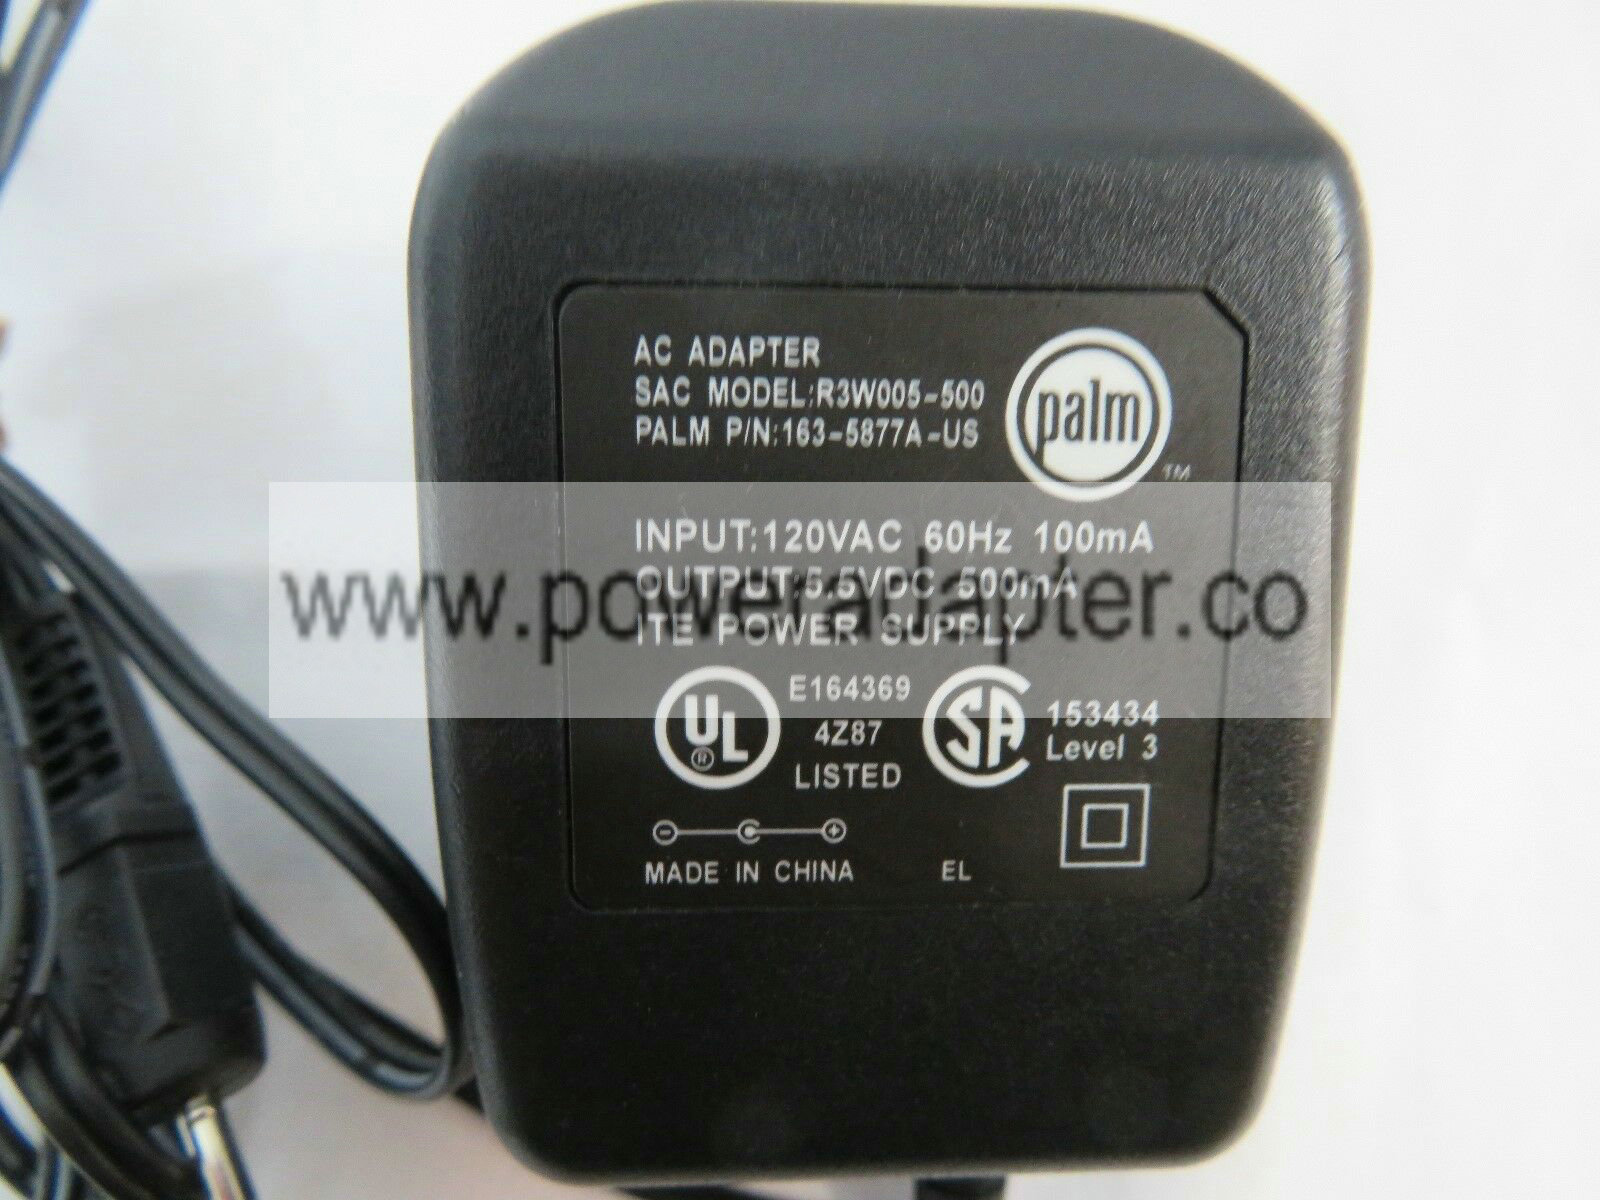 Palm AC Adapter Power Supply Model: R3W005-500 Part Number: 163-5877A-US Brand: Palm Model no: R3W005-500 MPN: 1